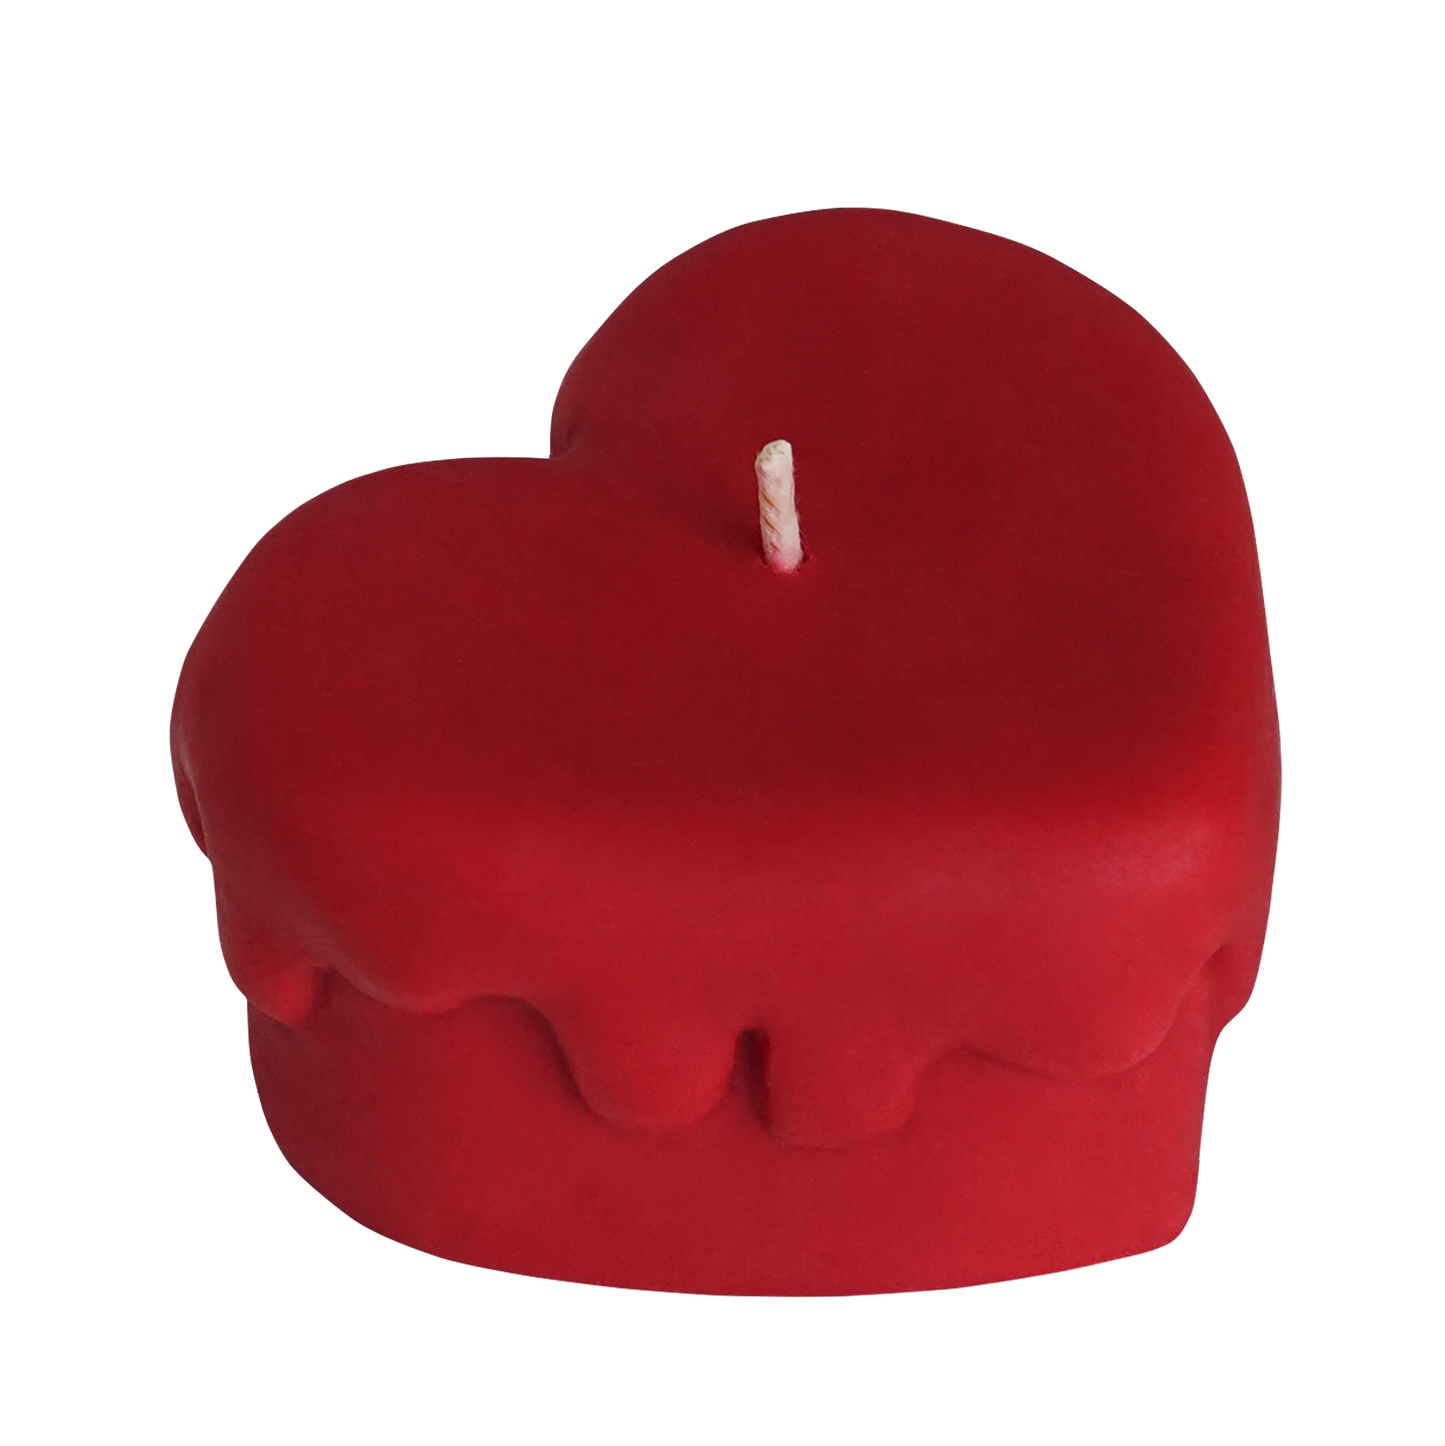 red melting heart candle